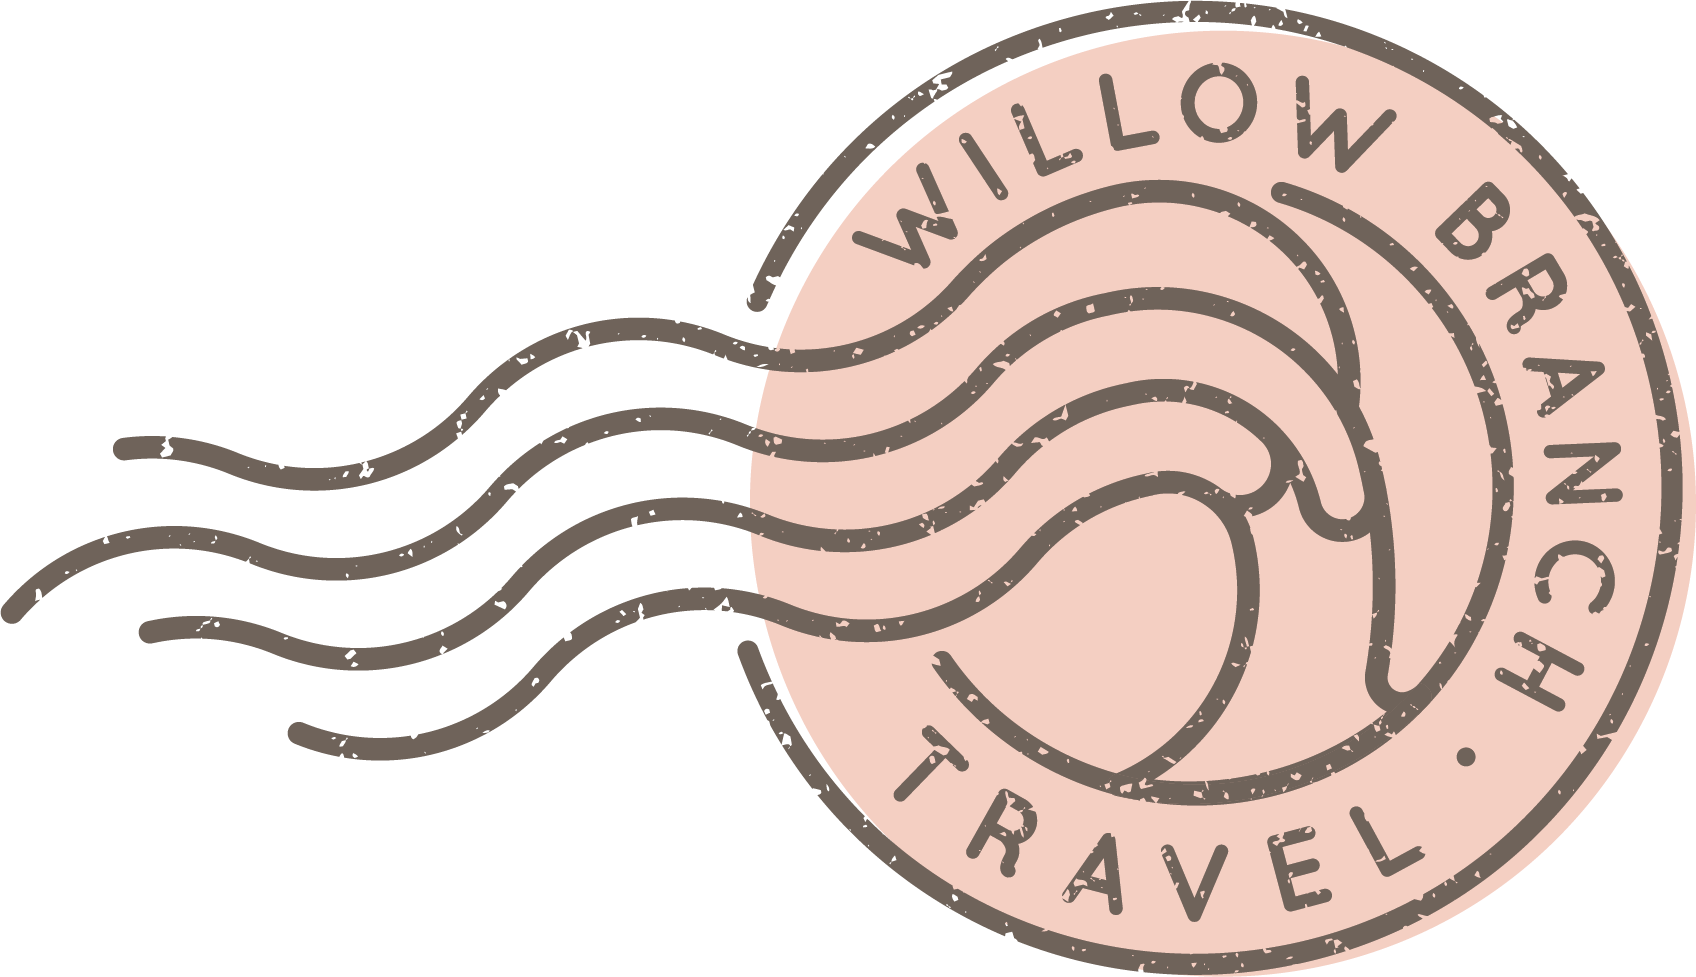 Willow Branch Travel